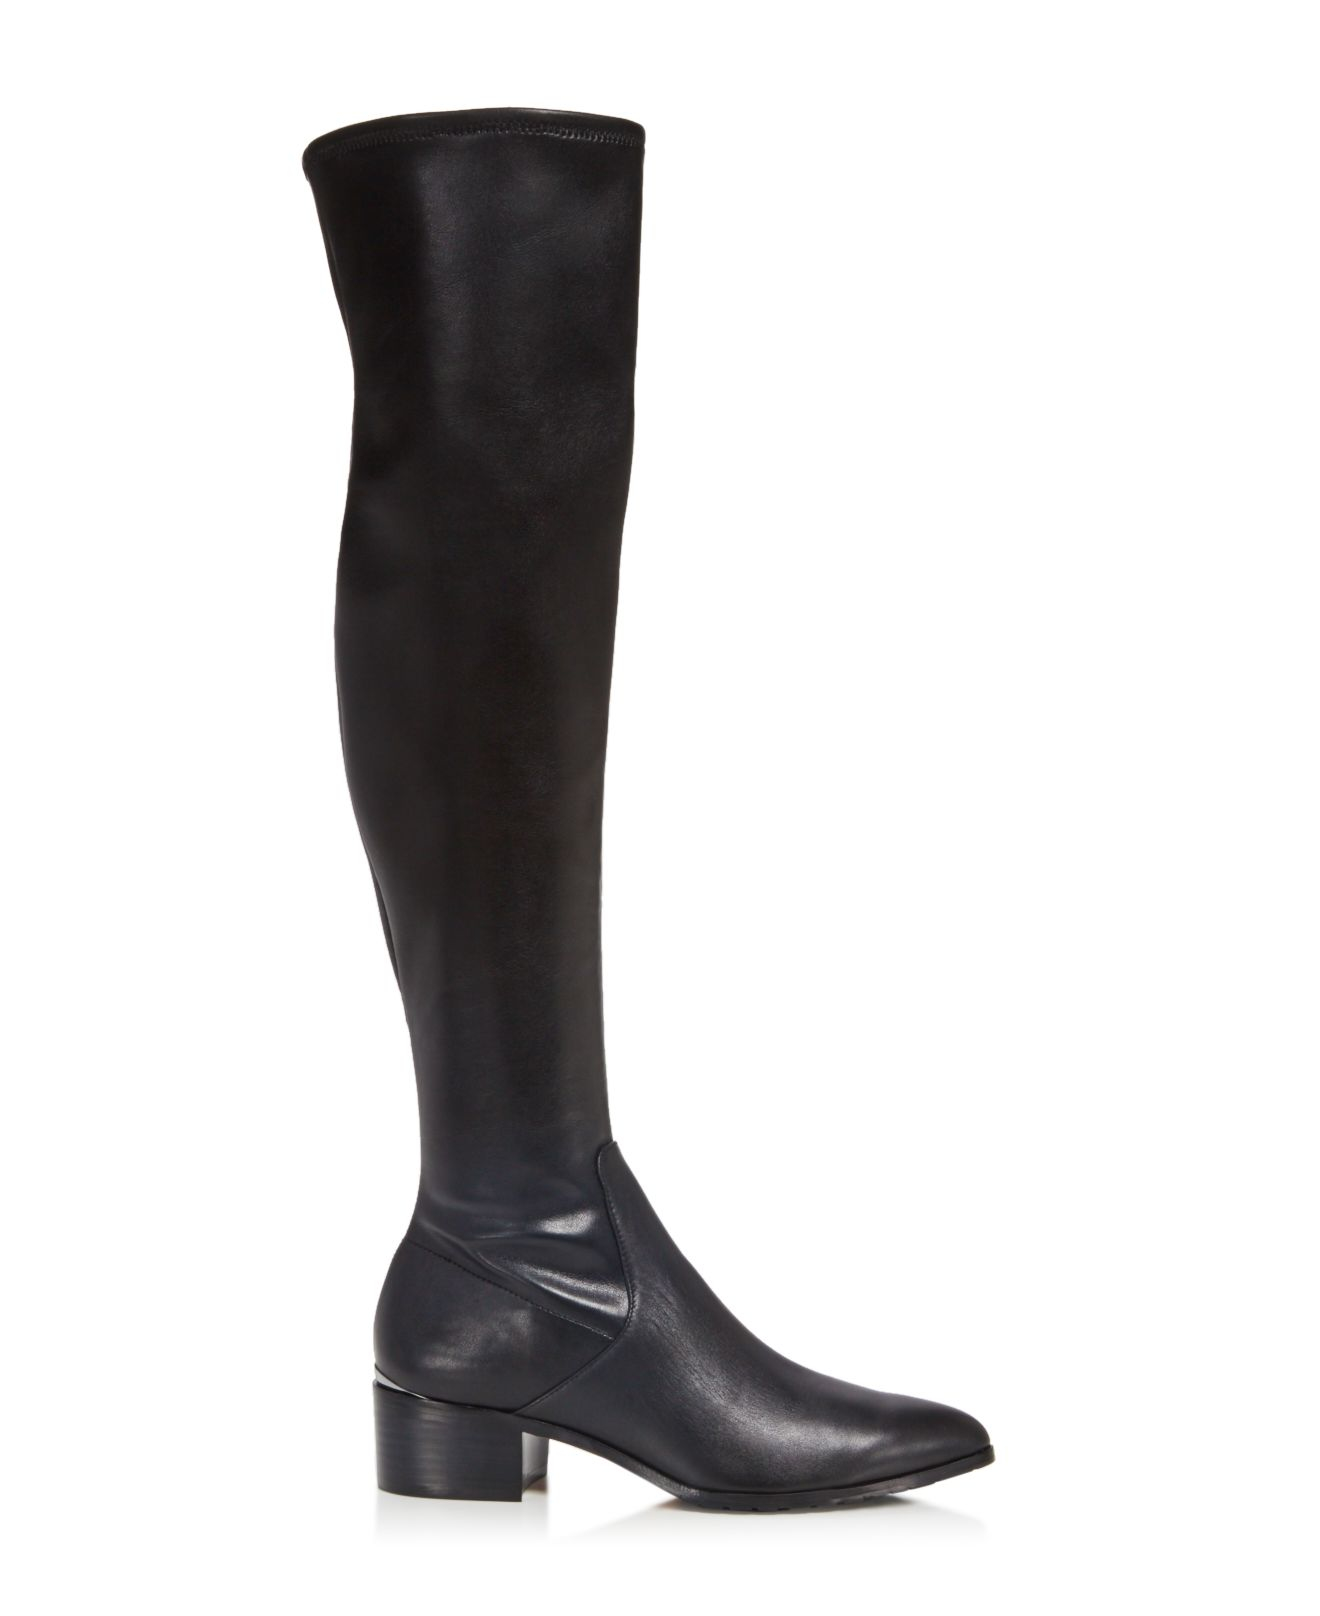 Donald J Pliner Dayle Stretch Nappa Leather Over The Knee Boots in ...